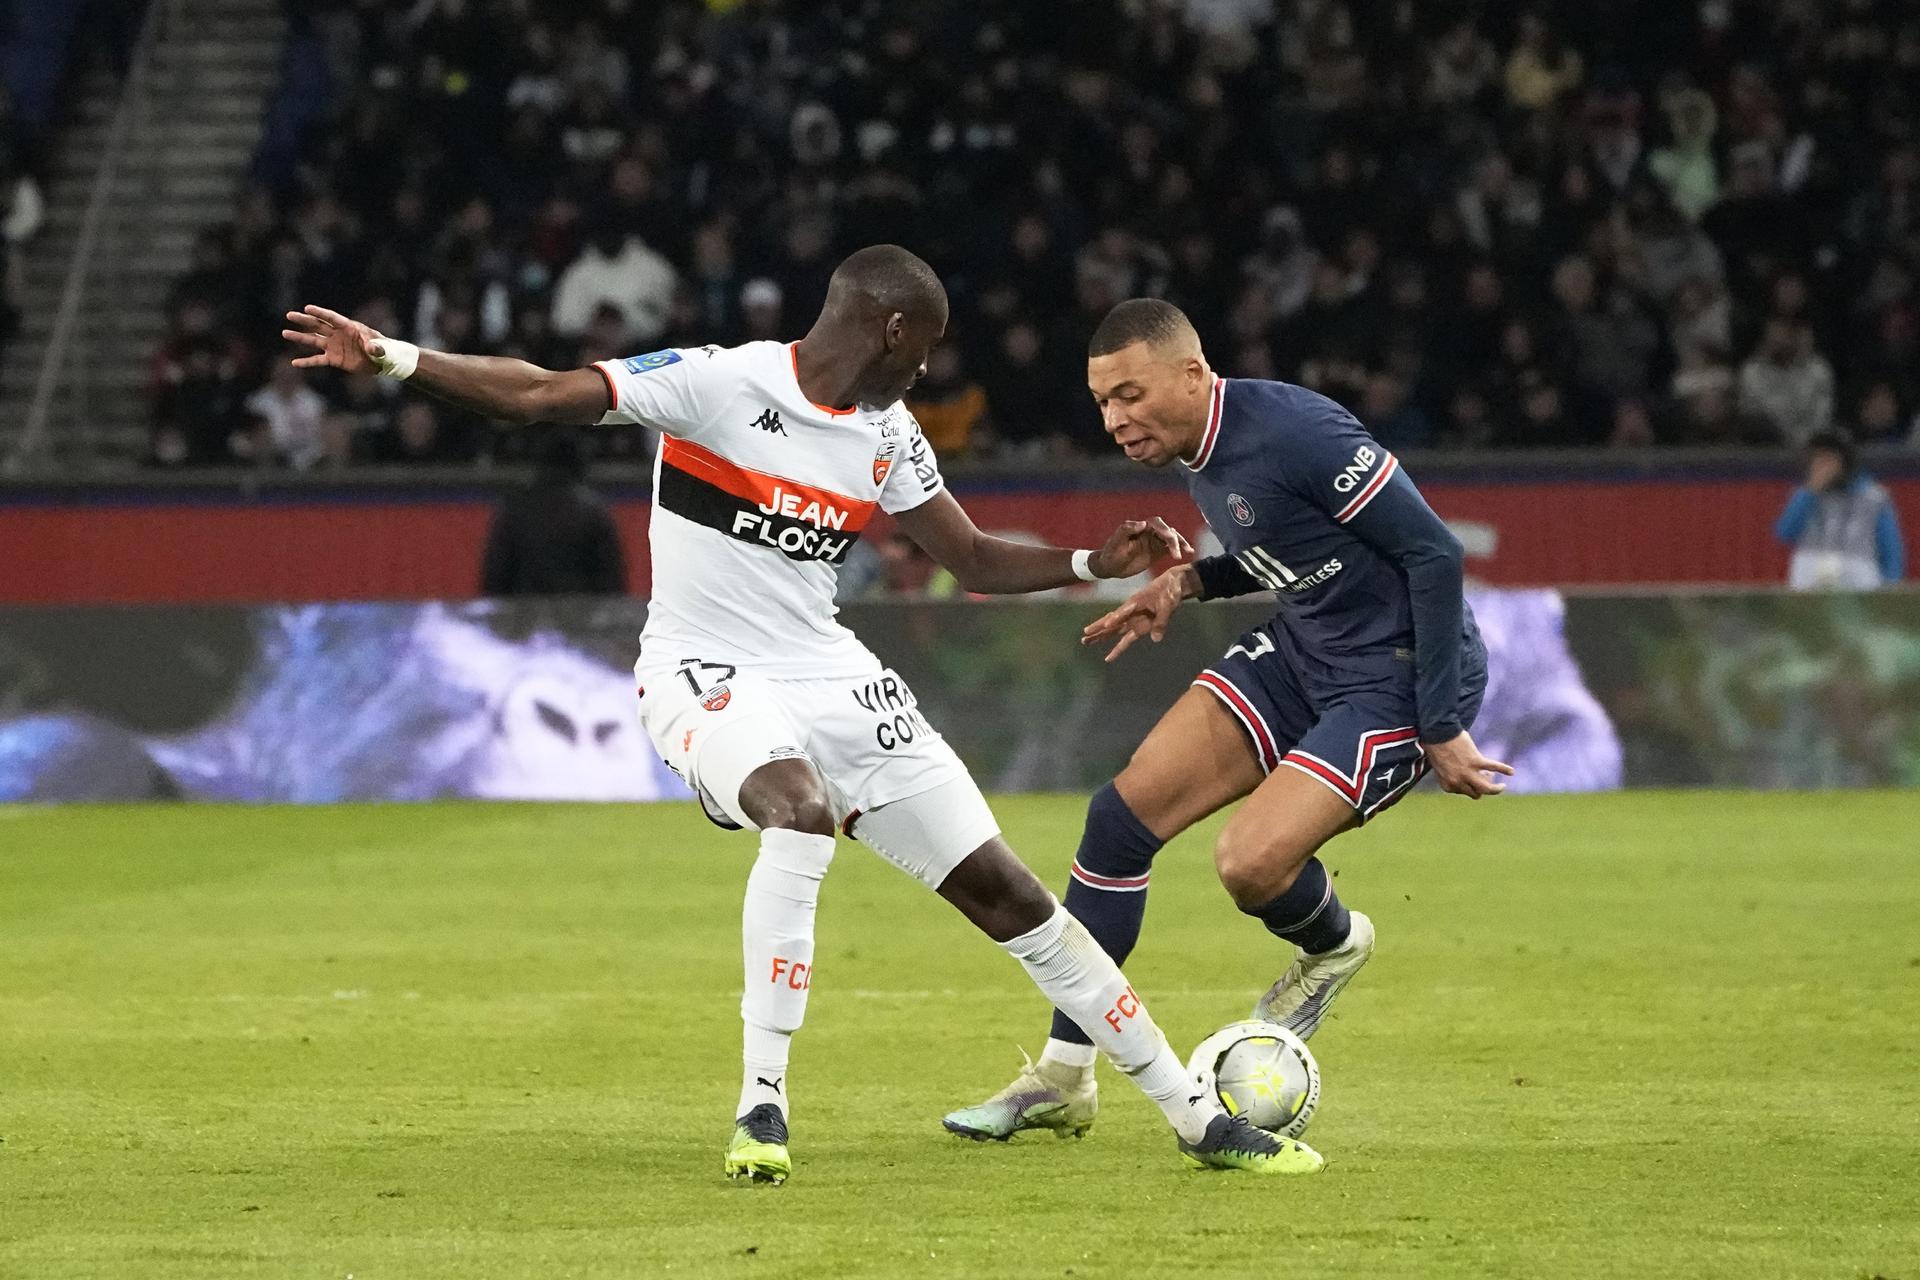 Lorient vs. Ajaccio Predictions, Picks and Betting Odds - Sunday, September 4, 2022